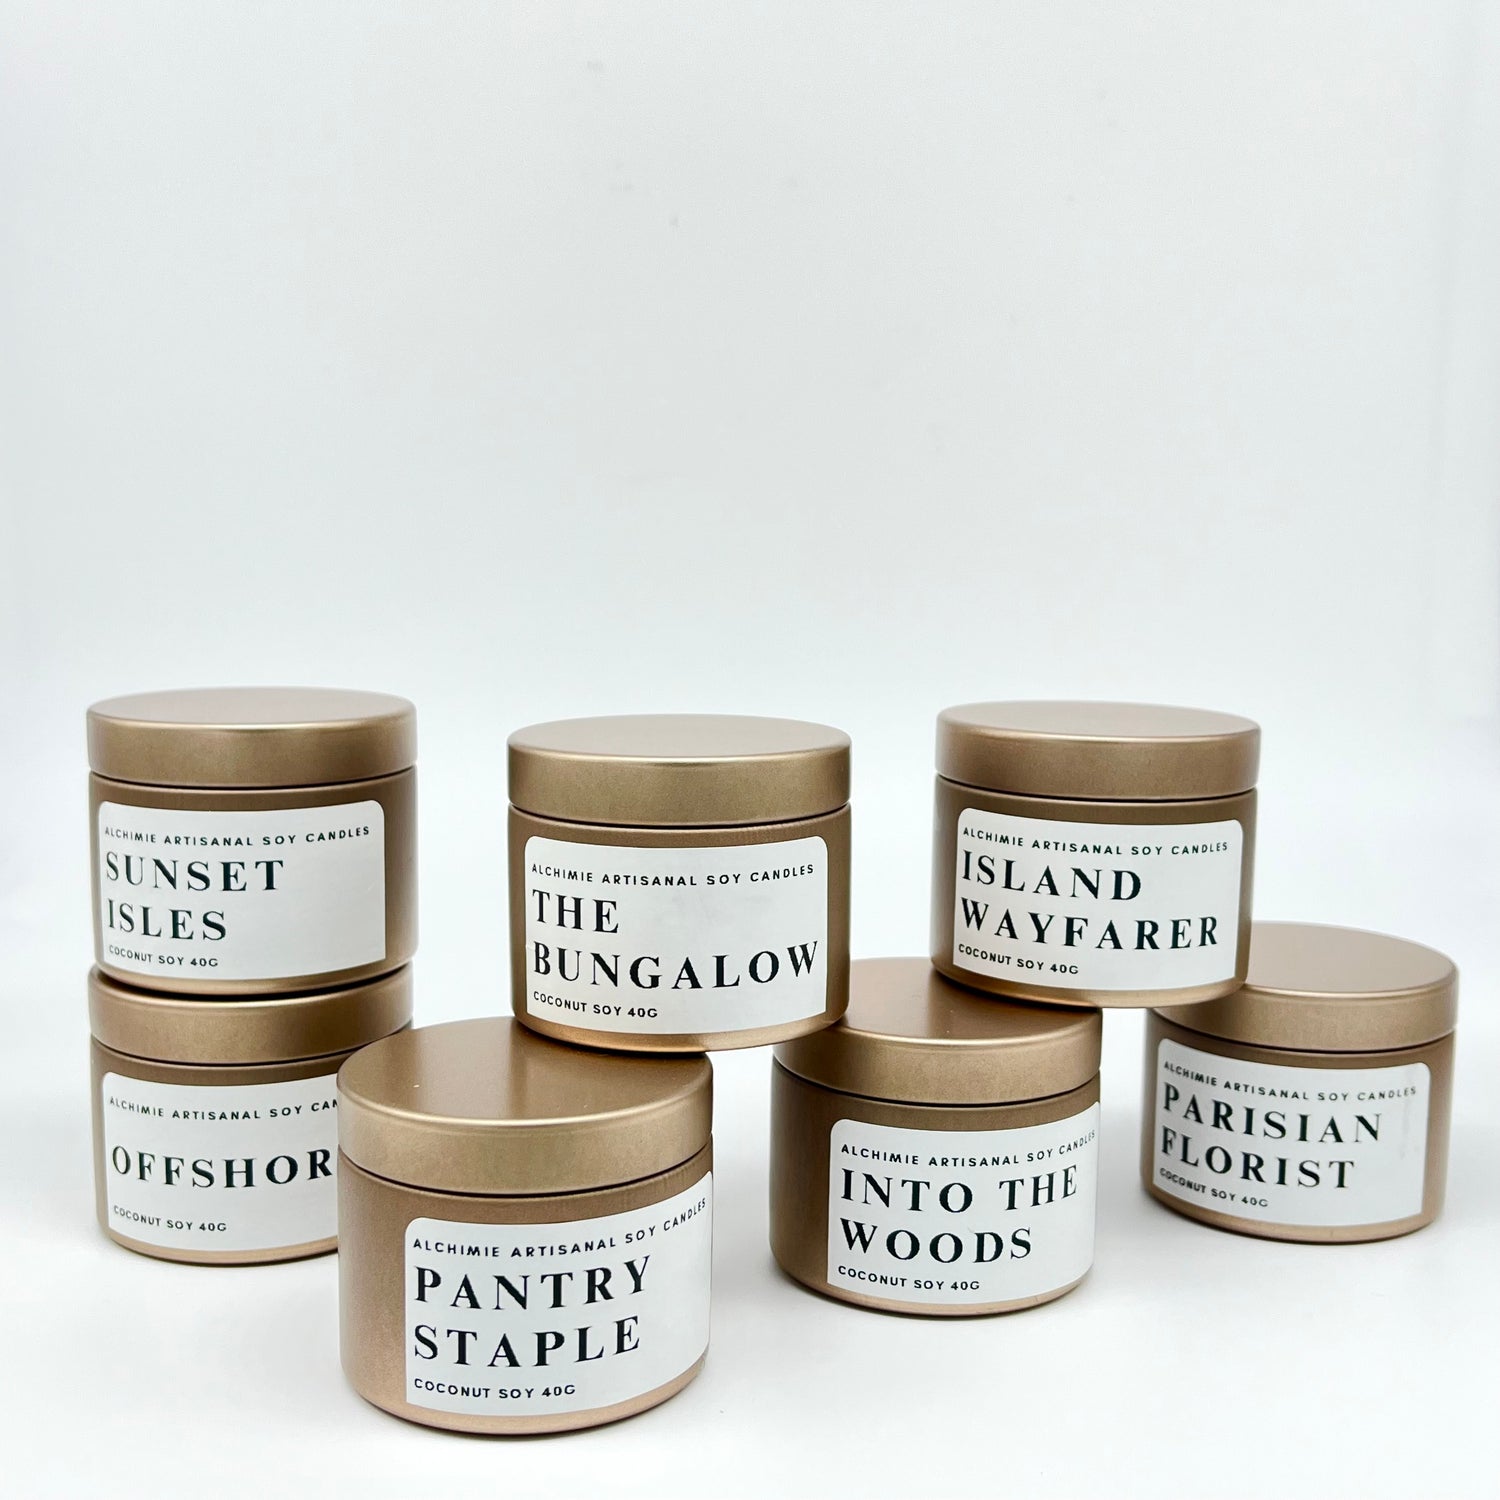 Alchimie-artisanal-soy-candles-the-discovery-collection-luxe-fragrances